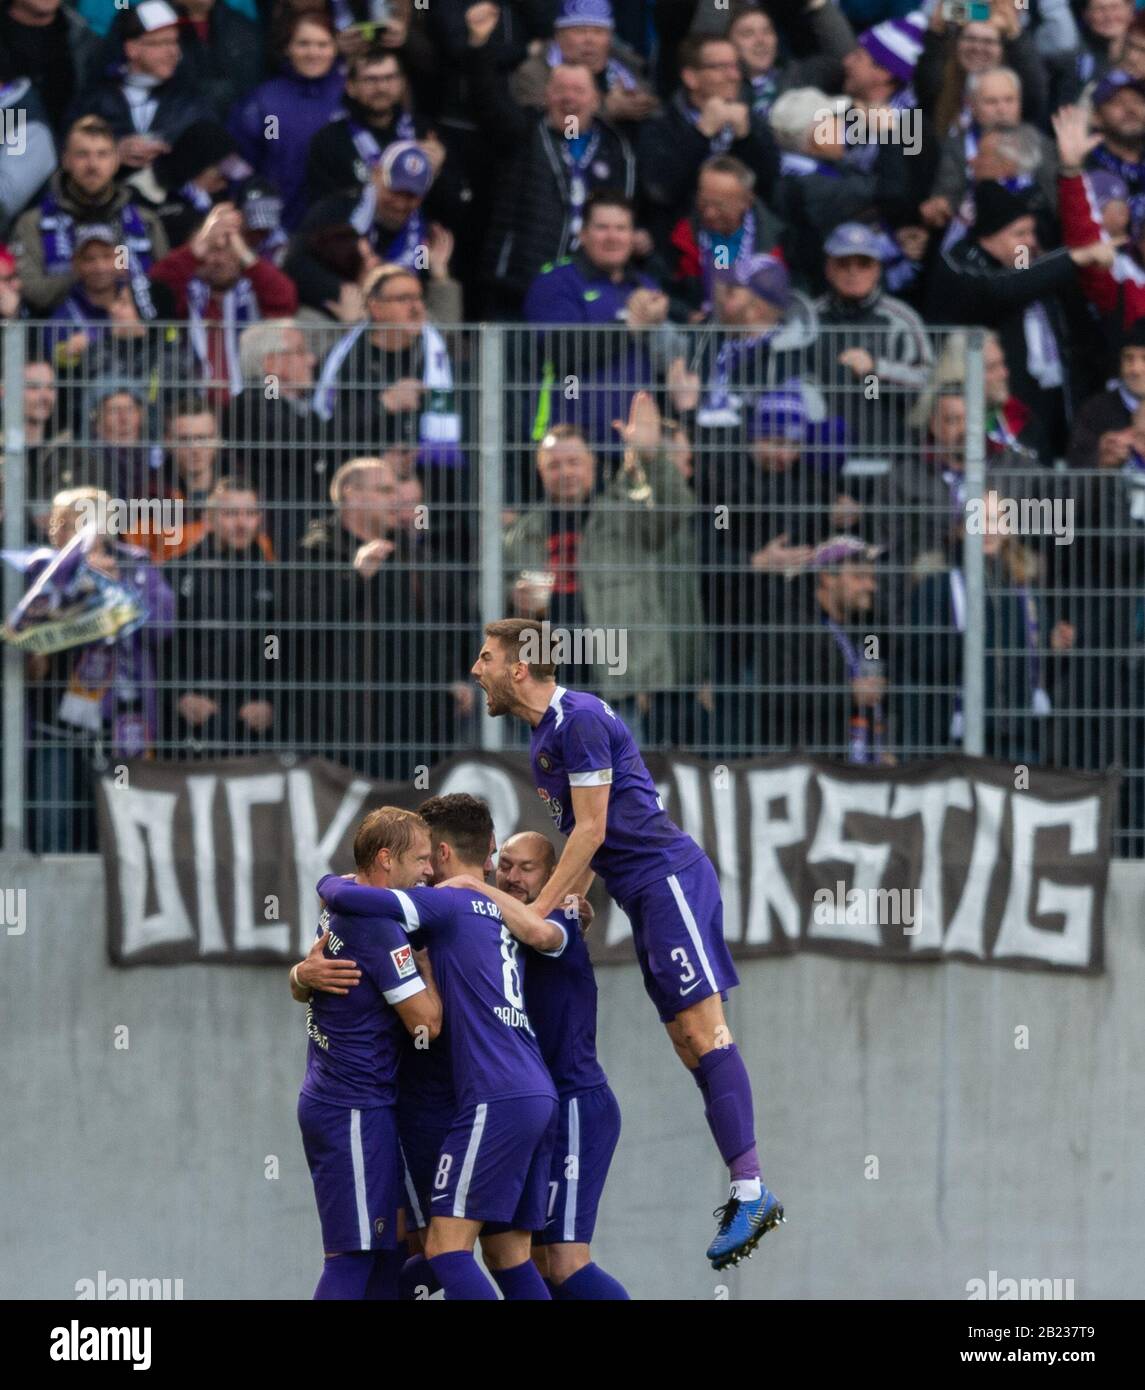 29 February 2020, Saxony, Aue: Football: 2nd Bundesliga, FC Erzgebirge Aue - Hamburger SV, 24th matchday, at the Sparkassen-Erzgebirgsstadion. Aues Pascal Testroet is cheered by his teammates Jan Hochscheidt (l-r), Tom Baumgart, Philipp Riese and Marko Mihojevic after his goal for the 1-0. Photo: Robert Michael/dpa-Zentralbild/dpa - IMPORTANT NOTE: In accordance with the regulations of the DFL Deutsche Fußball Liga and the DFB Deutscher Fußball-Bund, it is prohibited to exploit or have exploited in the stadium and/or from the game taken photographs in the form of sequence images and/or video-l Stock Photo